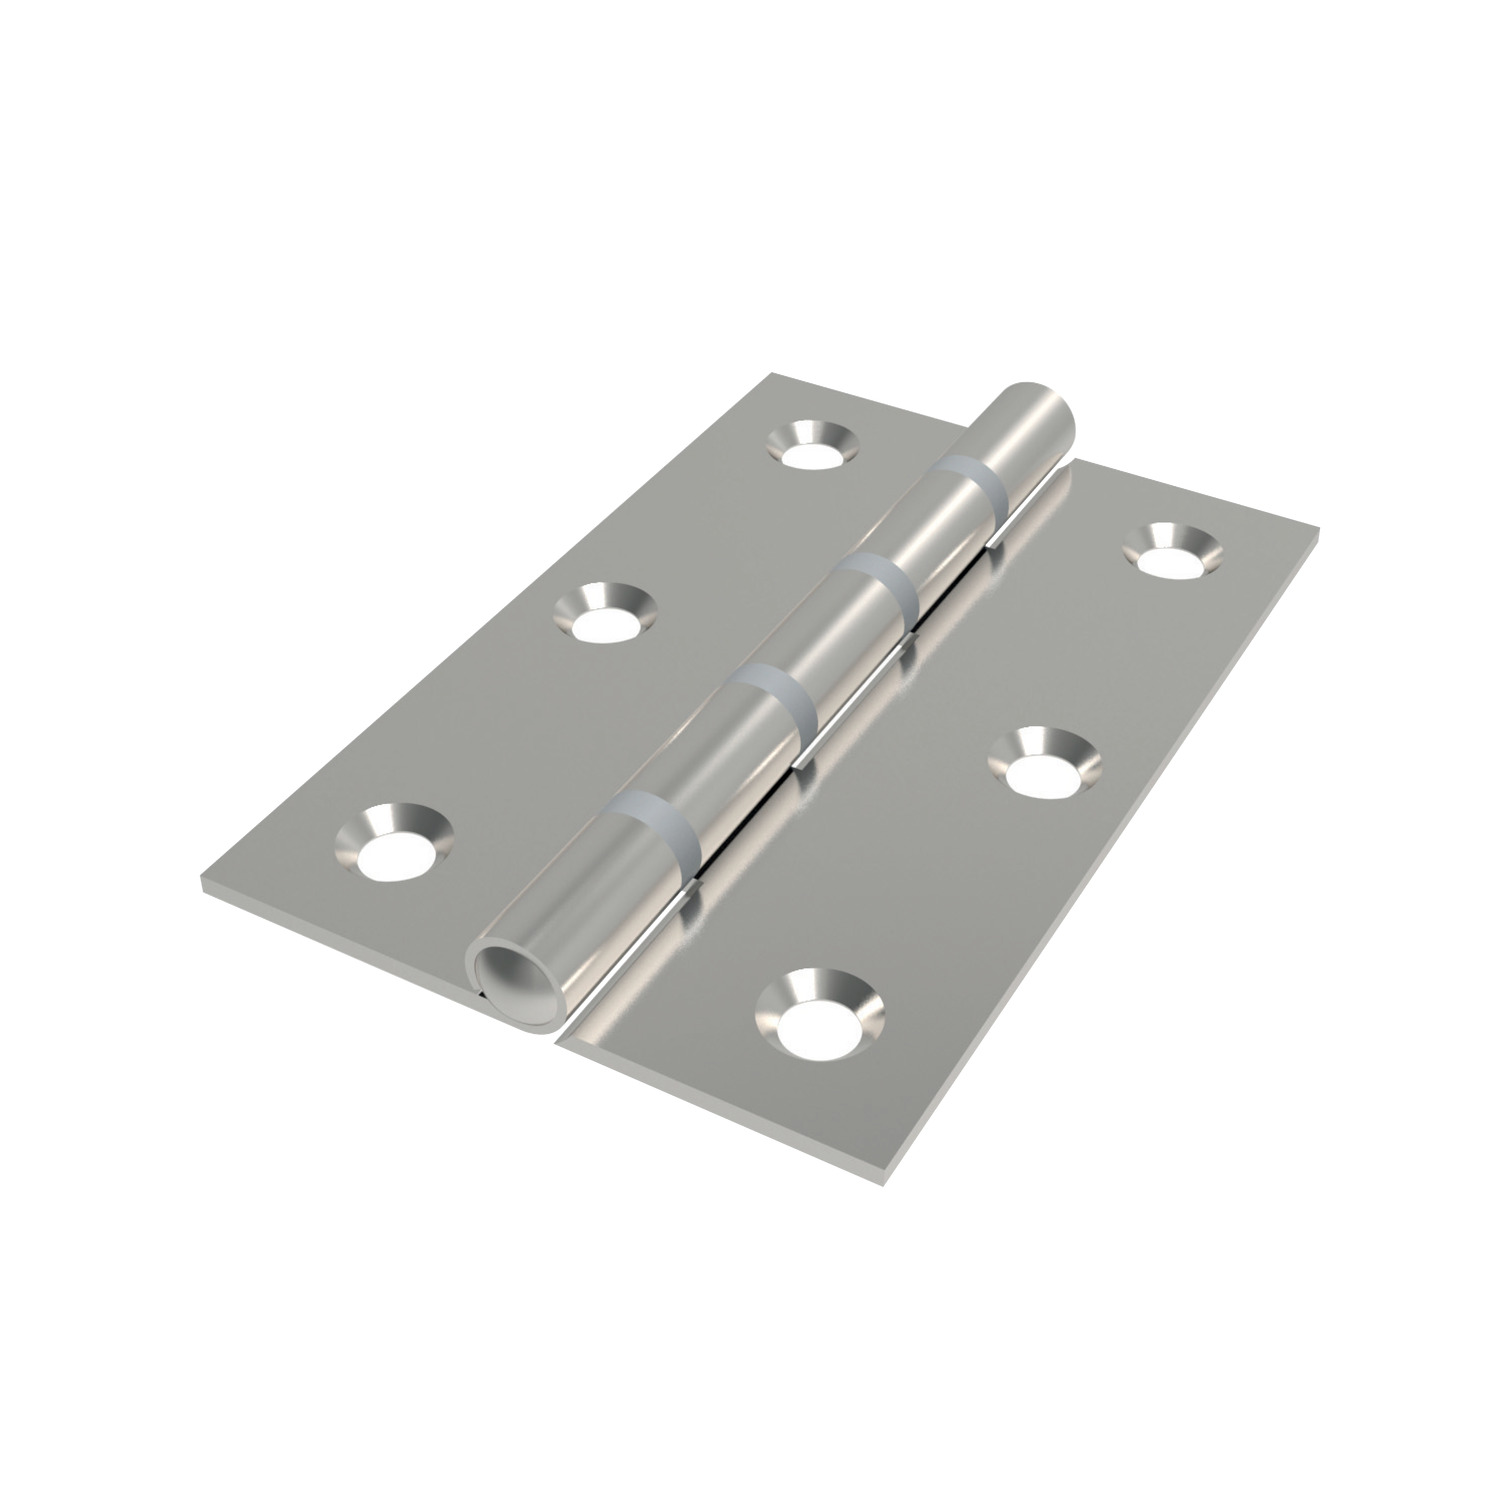 Product S0700, Surface Mount - Leaf hinges with polyacetal bushing - screw mount - stainless steel / 